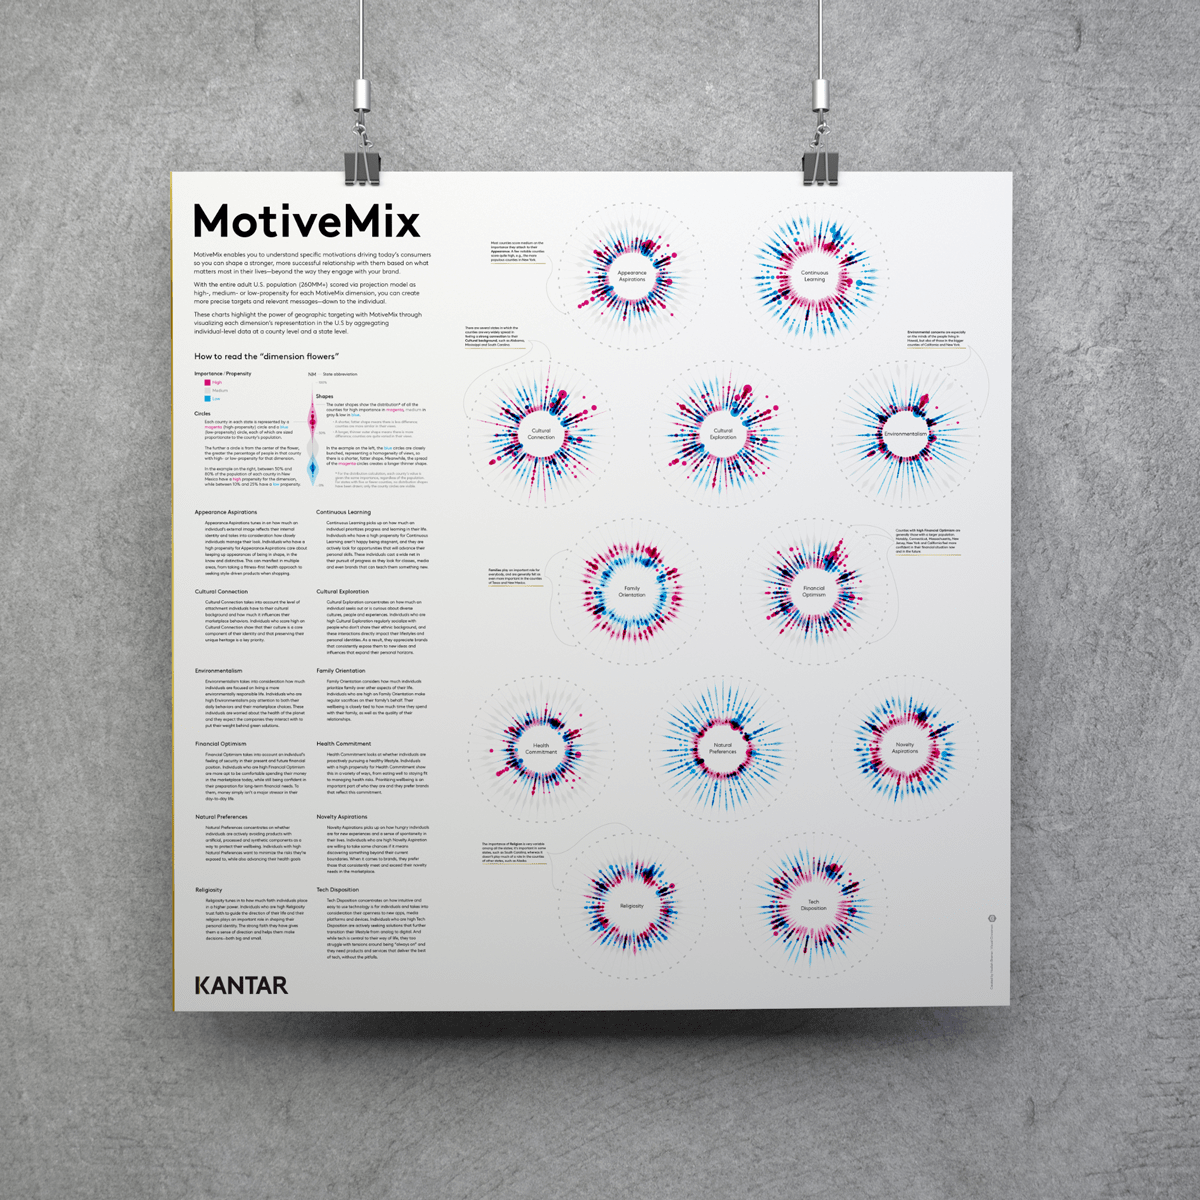 The white version of the poster about Kantar's MotiveMix dataset